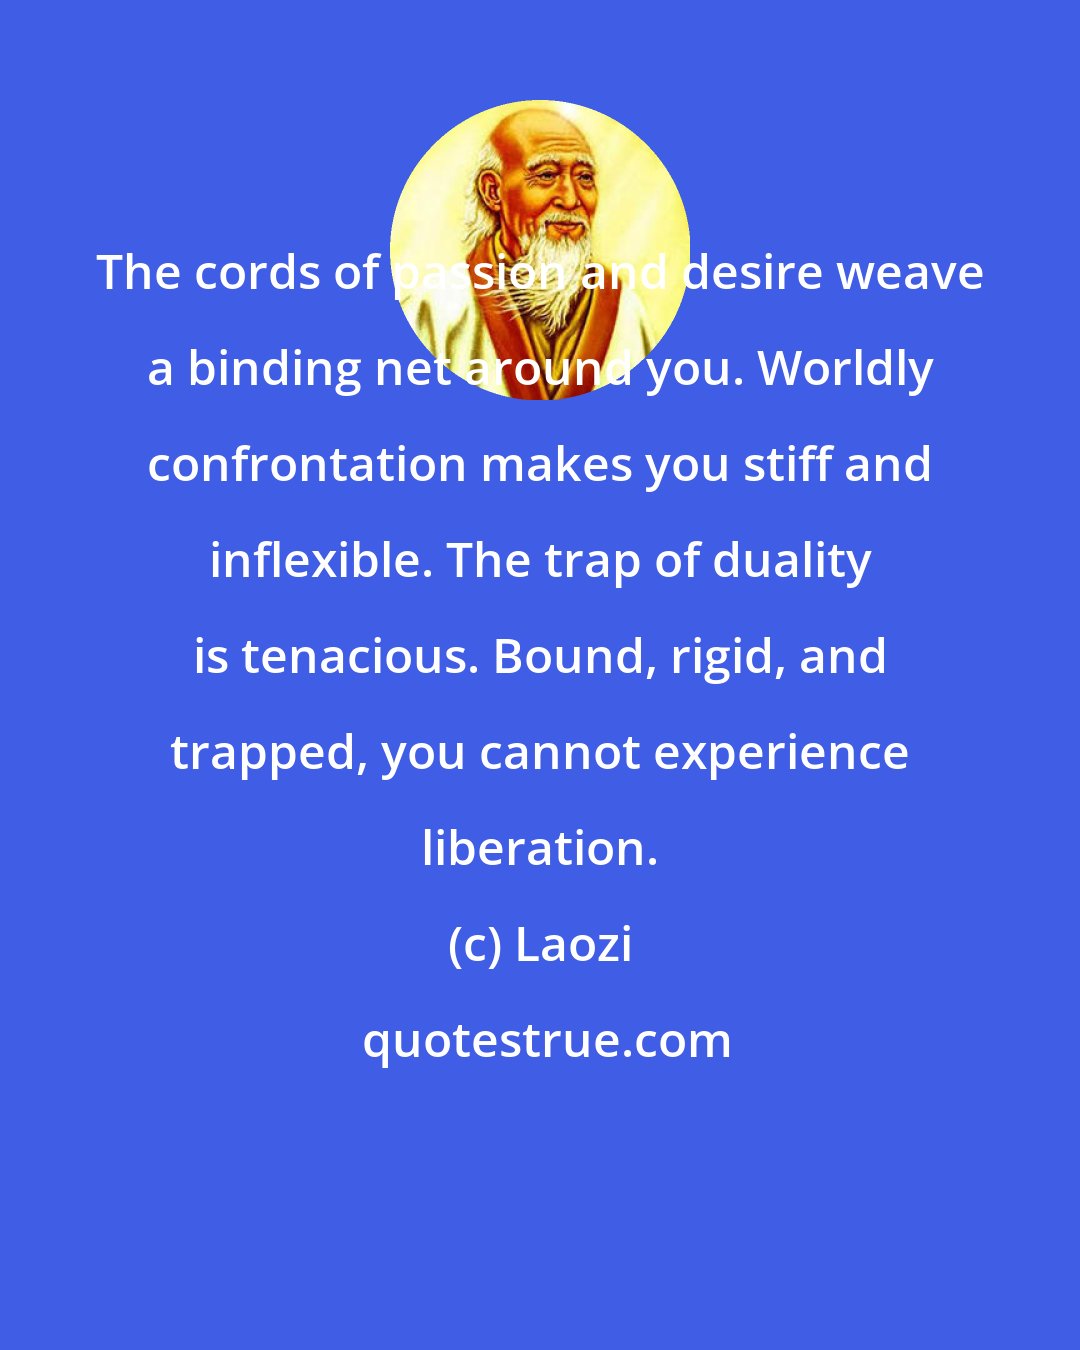 Laozi: The cords of passion and desire weave a binding net around you. Worldly confrontation makes you stiff and inflexible. The trap of duality is tenacious. Bound, rigid, and trapped, you cannot experience liberation.